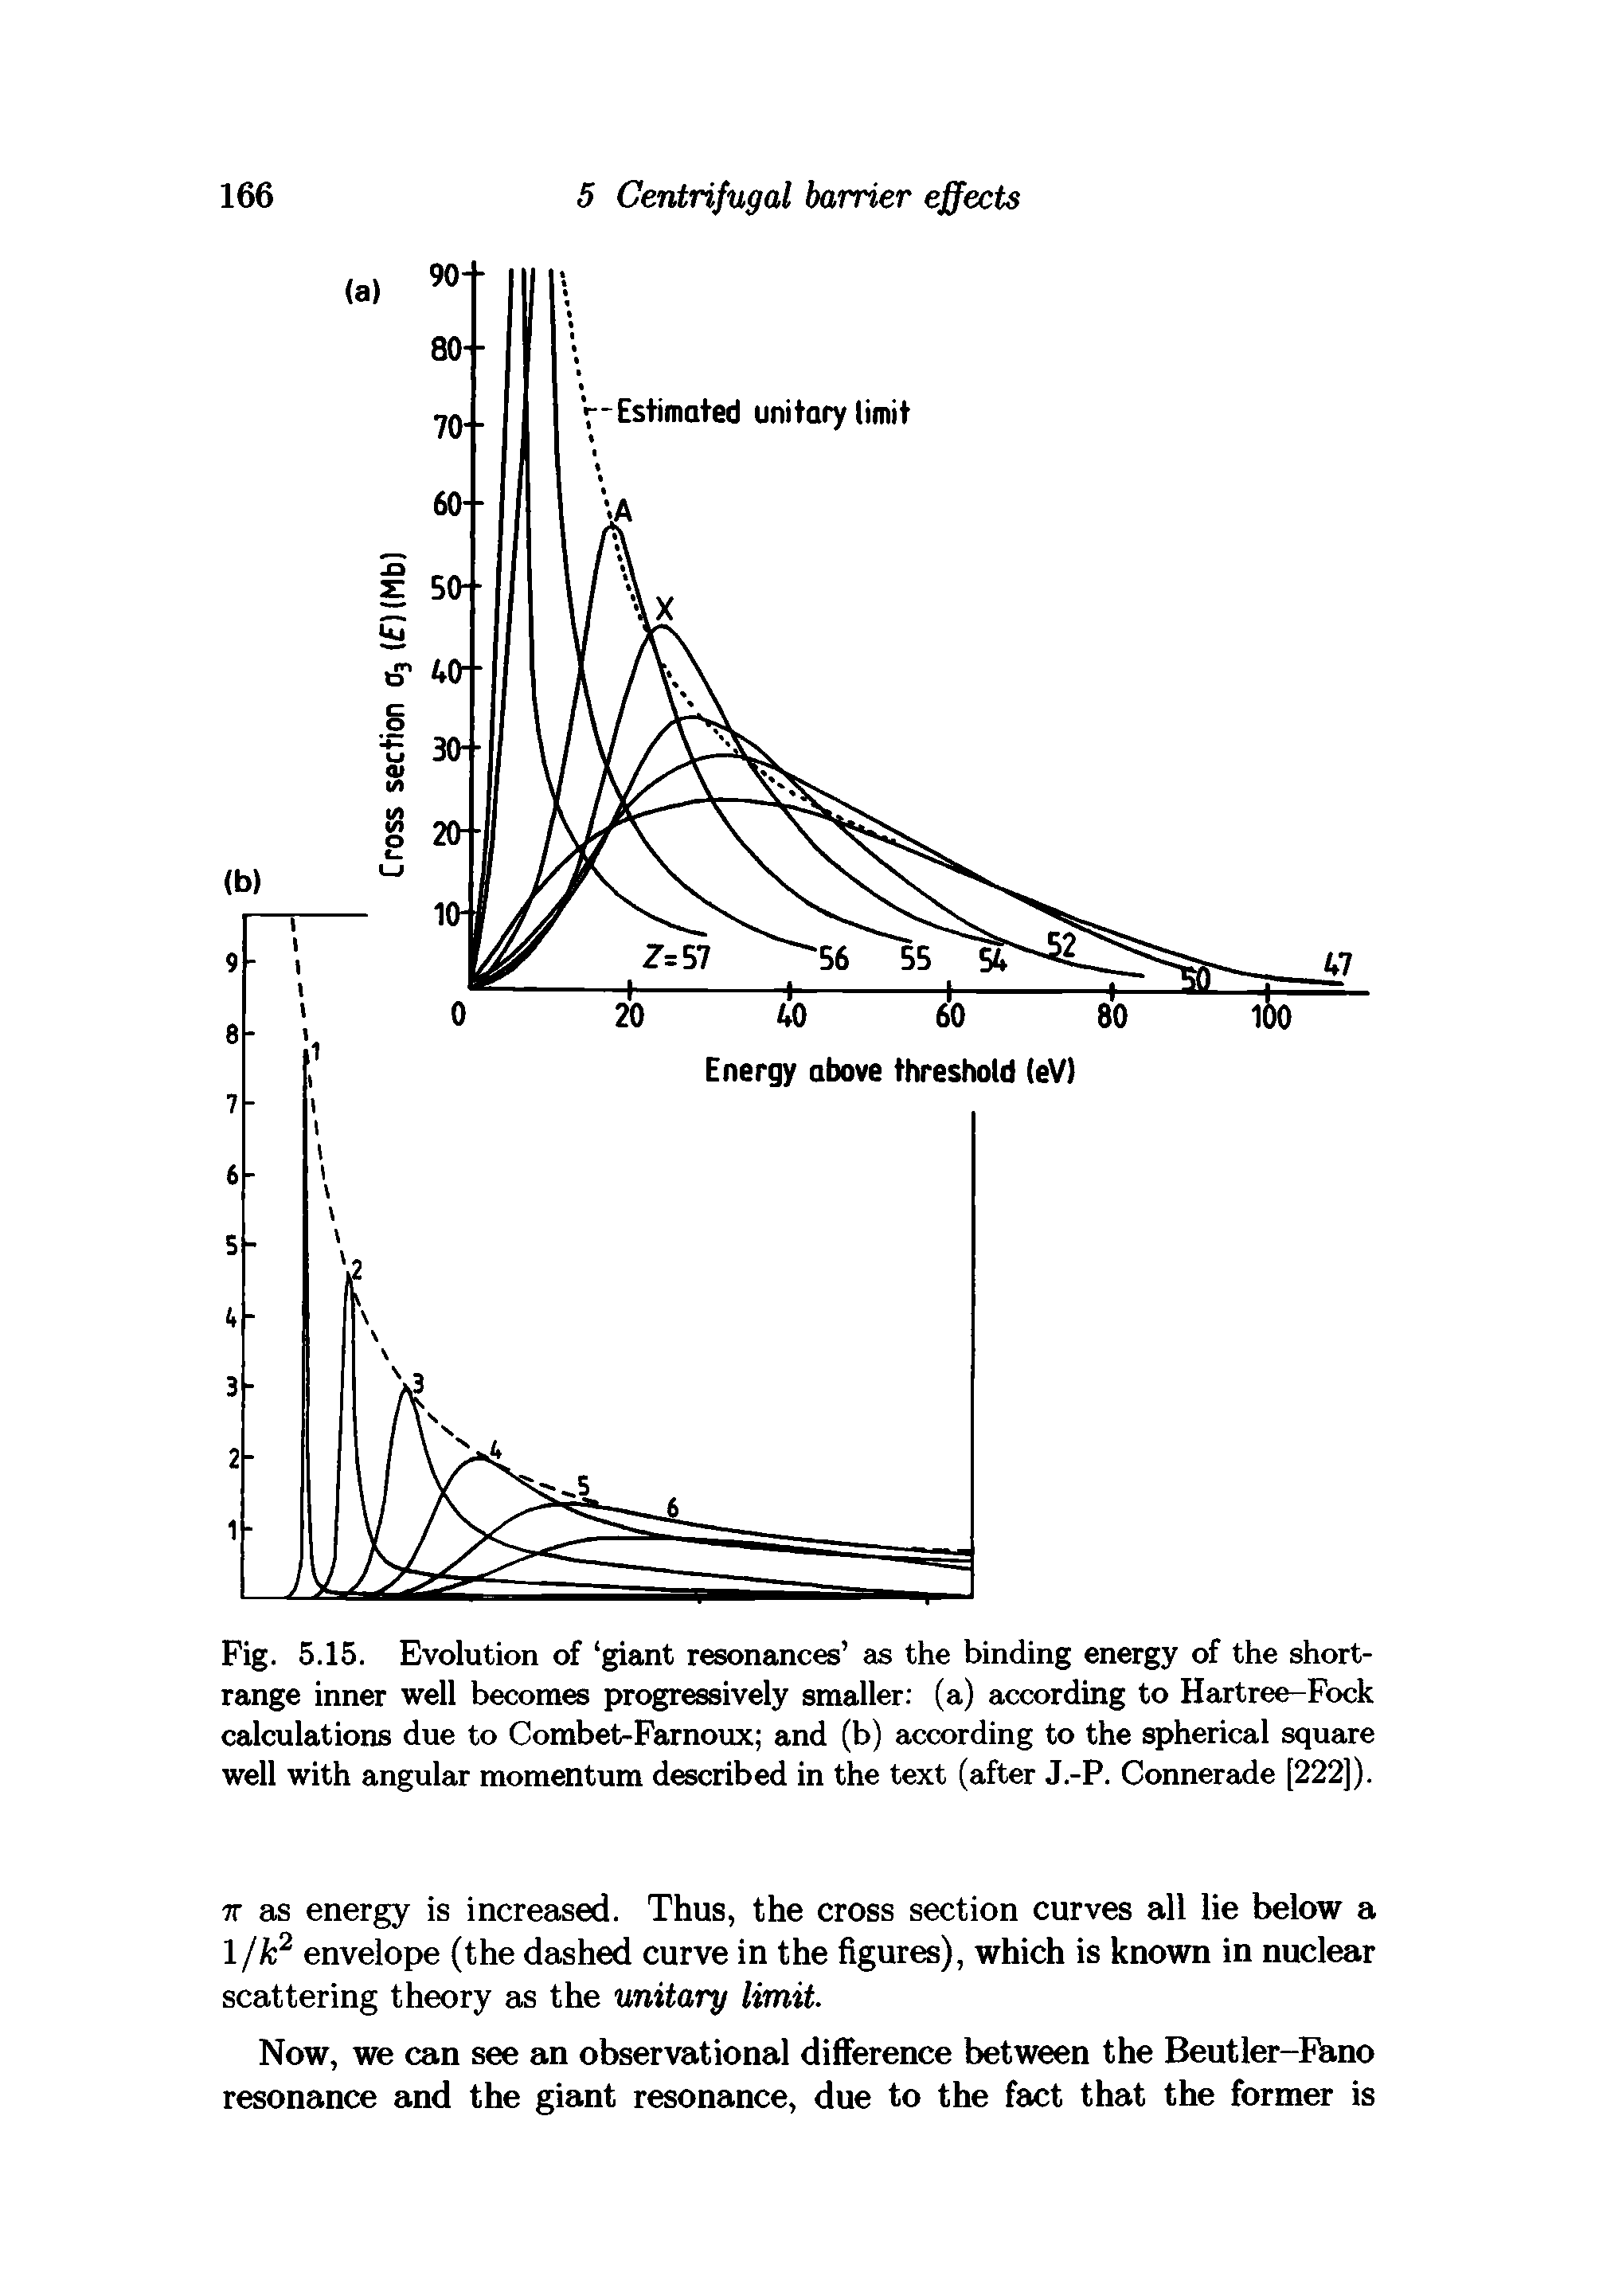 Fig. 5.15. Evolution of giant resonances as the binding energy of the short-range inner well becomes progressively smaller (a) according to Hartree-Fock calculations due to Combet-Farnoux and (b) according to the spherical square well with angular momentum described in the text (after J.-P. Connerade [222]).